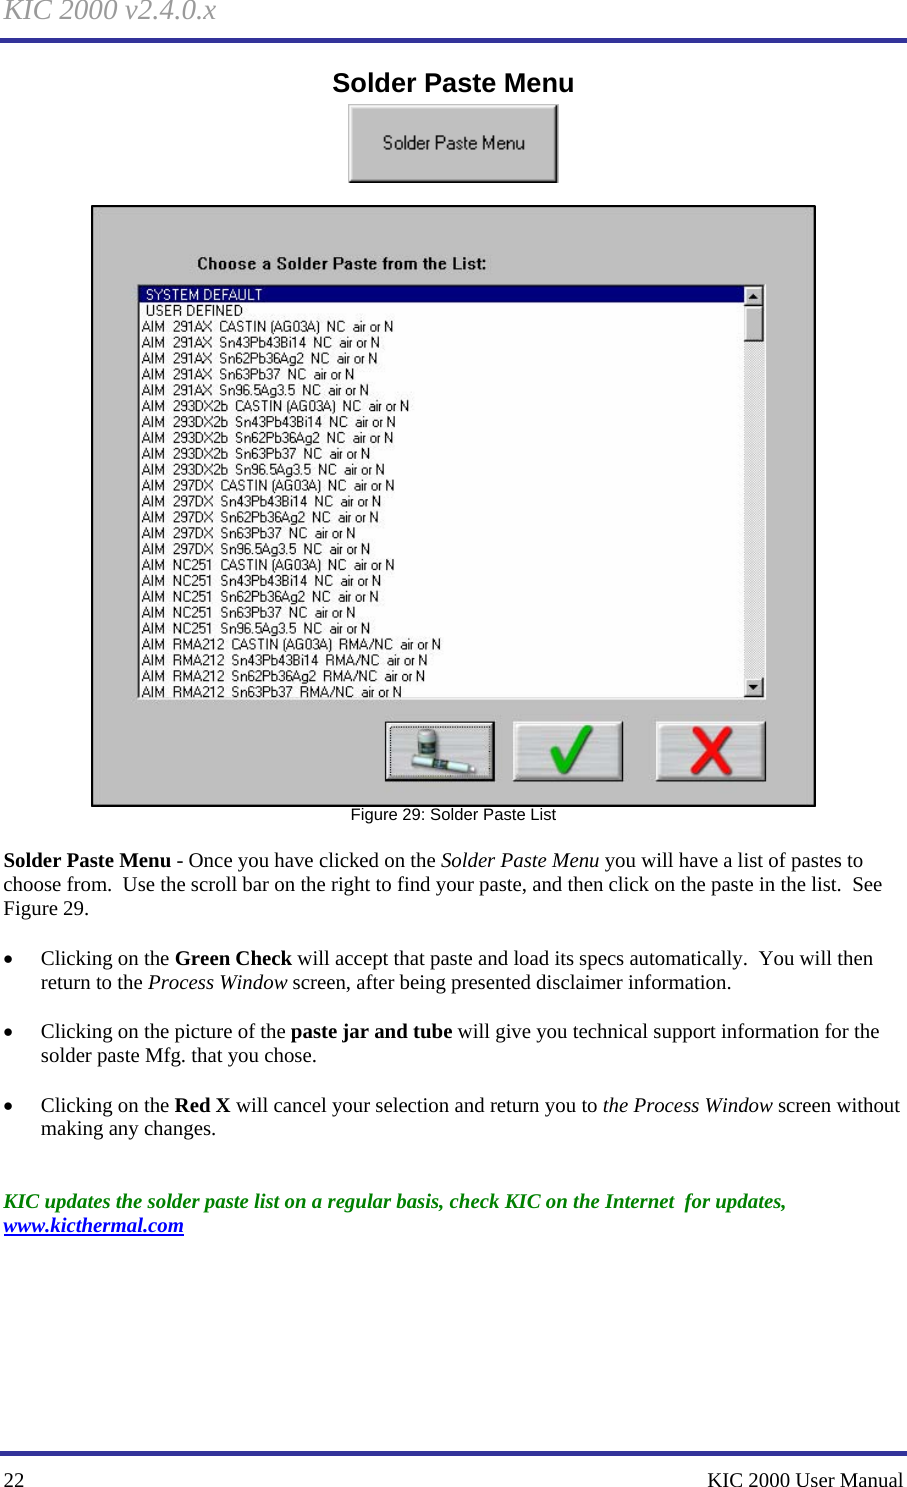 KIC 2000 v2.4.0.x 22    KIC 2000 User Manual Solder Paste Menu    Figure 29: Solder Paste List  Solder Paste Menu - Once you have clicked on the Solder Paste Menu you will have a list of pastes to choose from.  Use the scroll bar on the right to find your paste, and then click on the paste in the list.  See Figure 29.    • Clicking on the Green Check will accept that paste and load its specs automatically.  You will then return to the Process Window screen, after being presented disclaimer information.  • Clicking on the picture of the paste jar and tube will give you technical support information for the solder paste Mfg. that you chose.  • Clicking on the Red X will cancel your selection and return you to the Process Window screen without making any changes.   KIC updates the solder paste list on a regular basis, check KIC on the Internet  for updates, www.kicthermal.com   